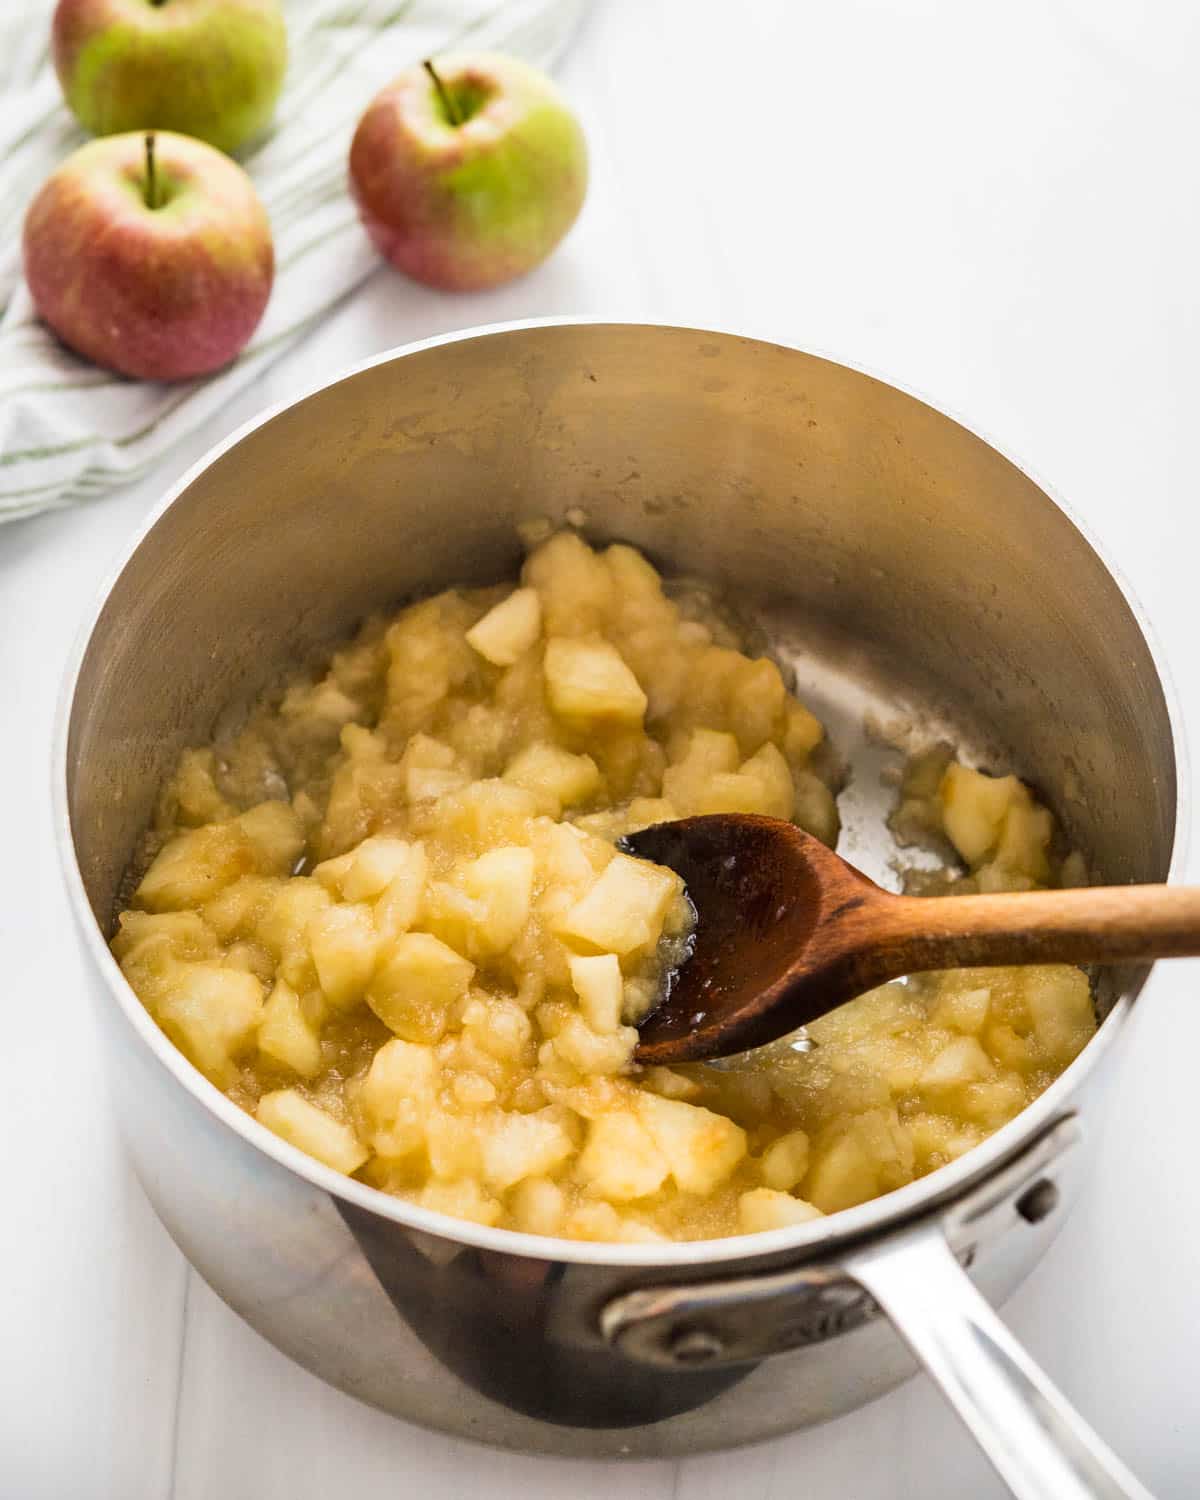 Cooking the apples until they start to fall apart. 